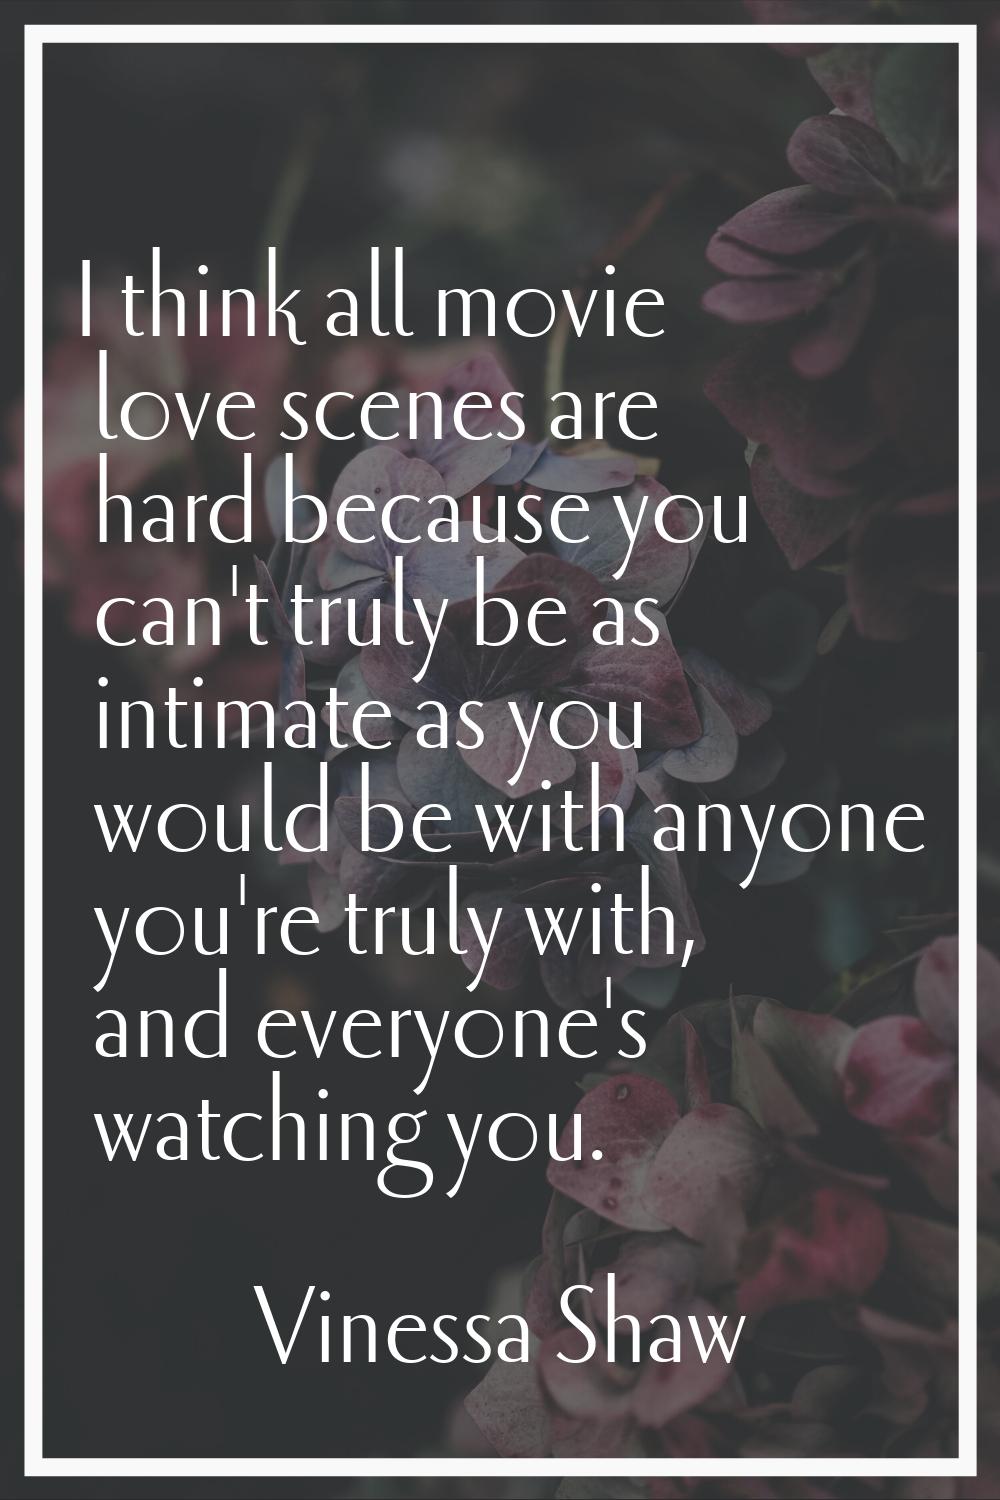 I think all movie love scenes are hard because you can't truly be as intimate as you would be with 